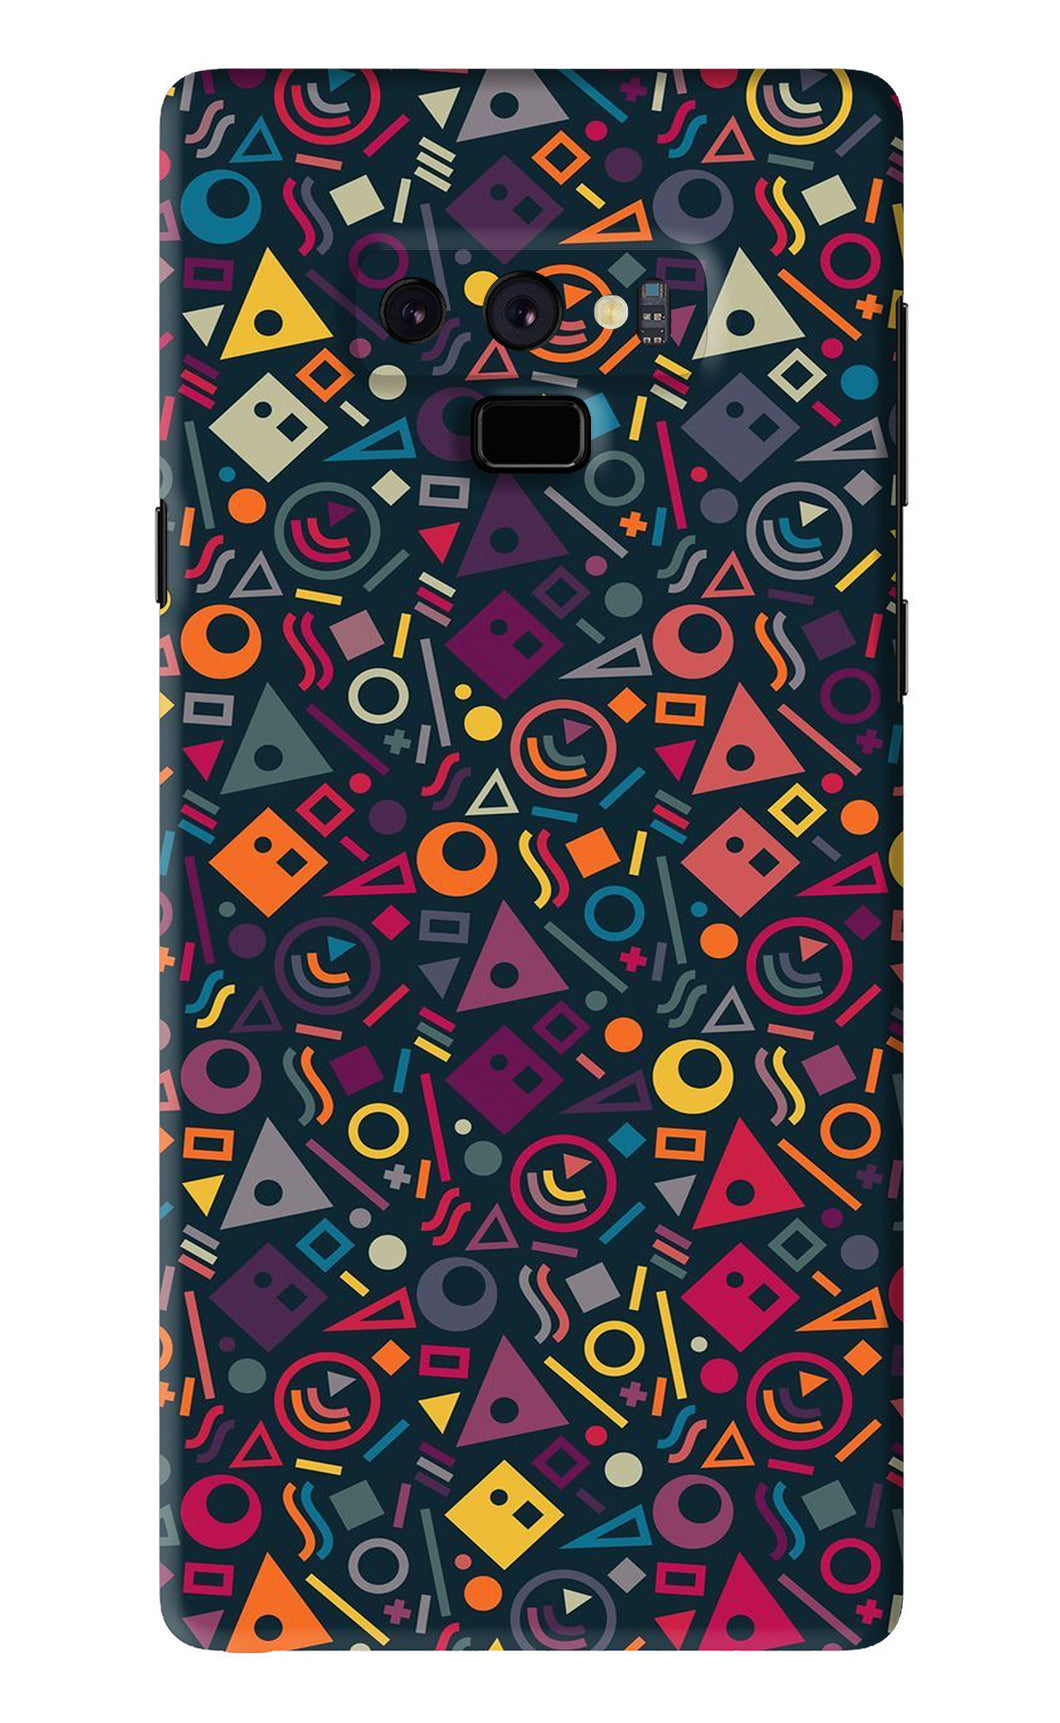 Geometric Abstract Samsung Galaxy Note 9 Back Skin Wrap